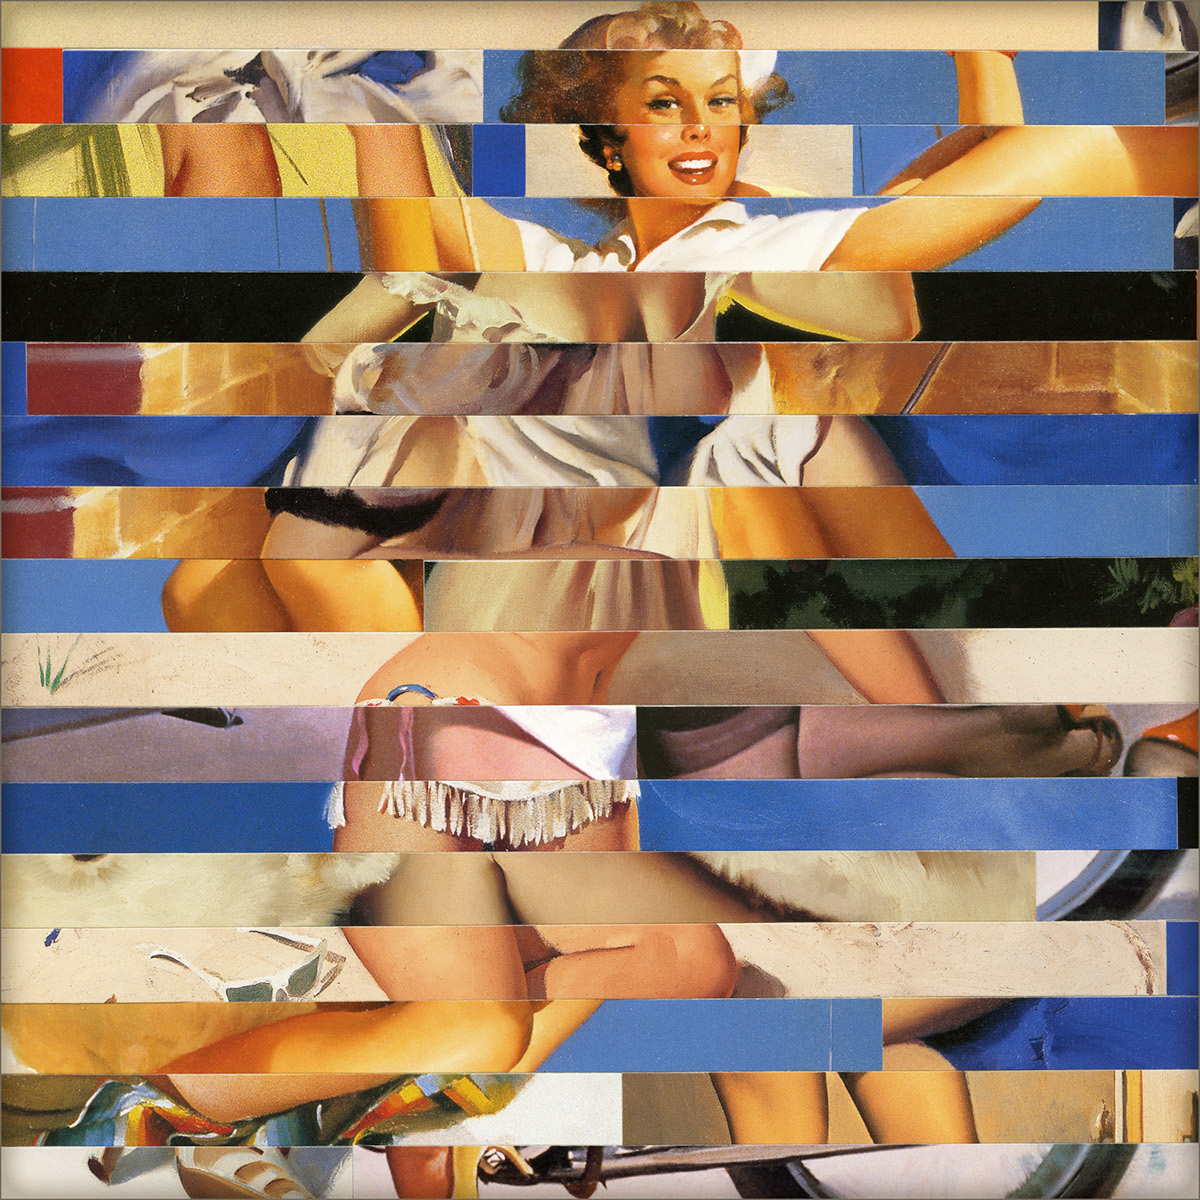 Glitch pin-up collage abstract stripes handmade woman strips error Chance pattern vintage sexy pinup post-digital